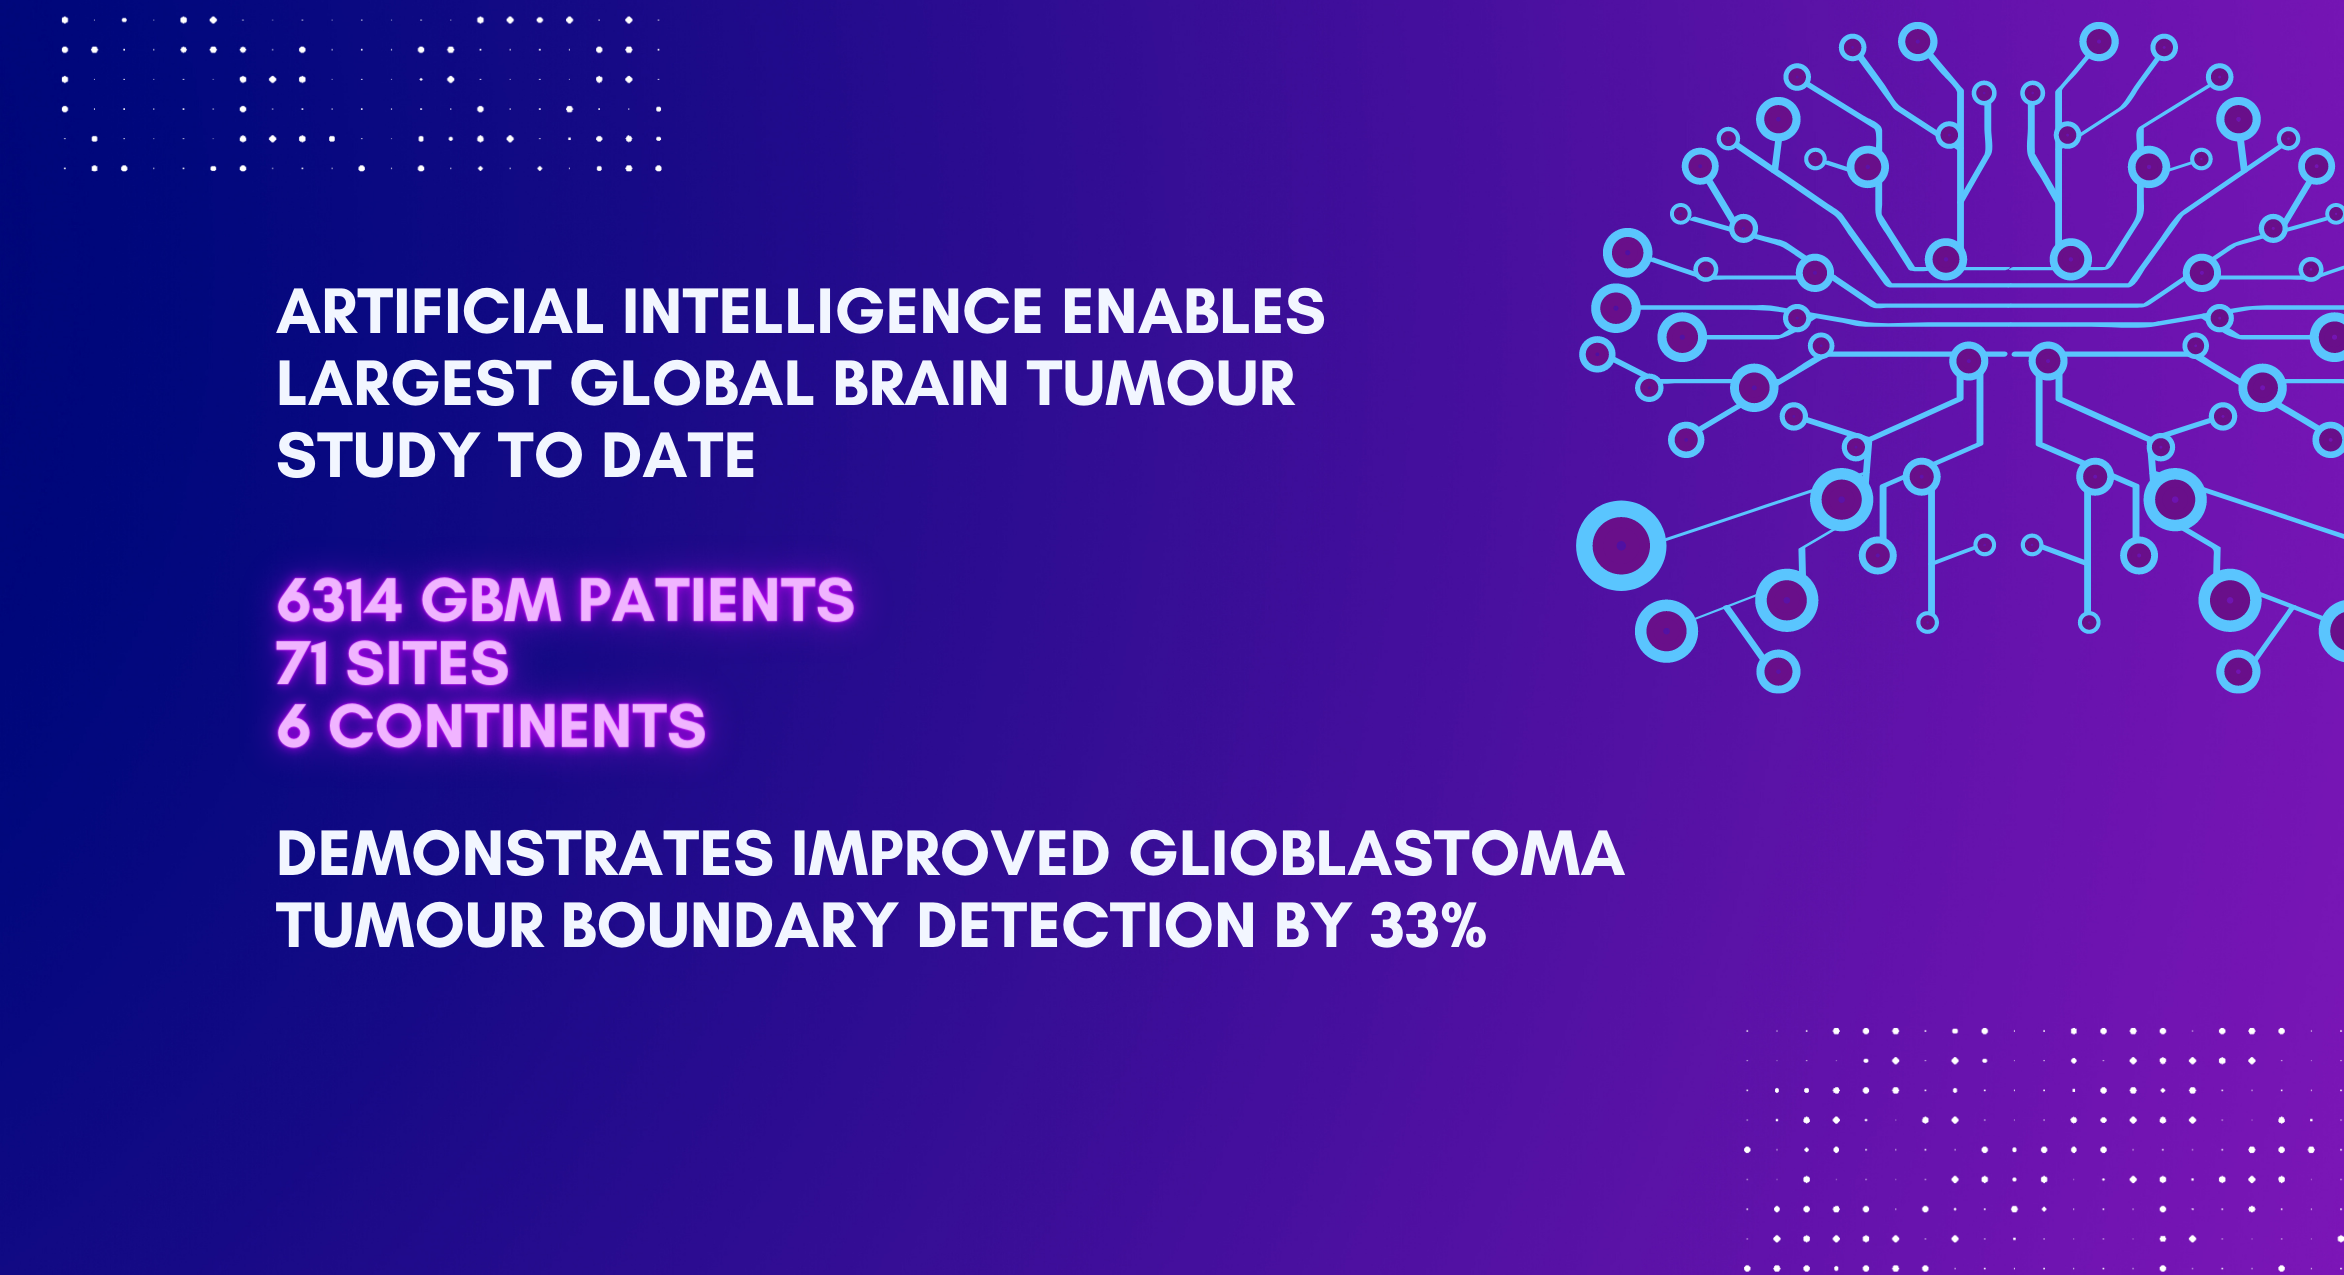 Artificial intelligence enables largest global brain tumour study to date  image